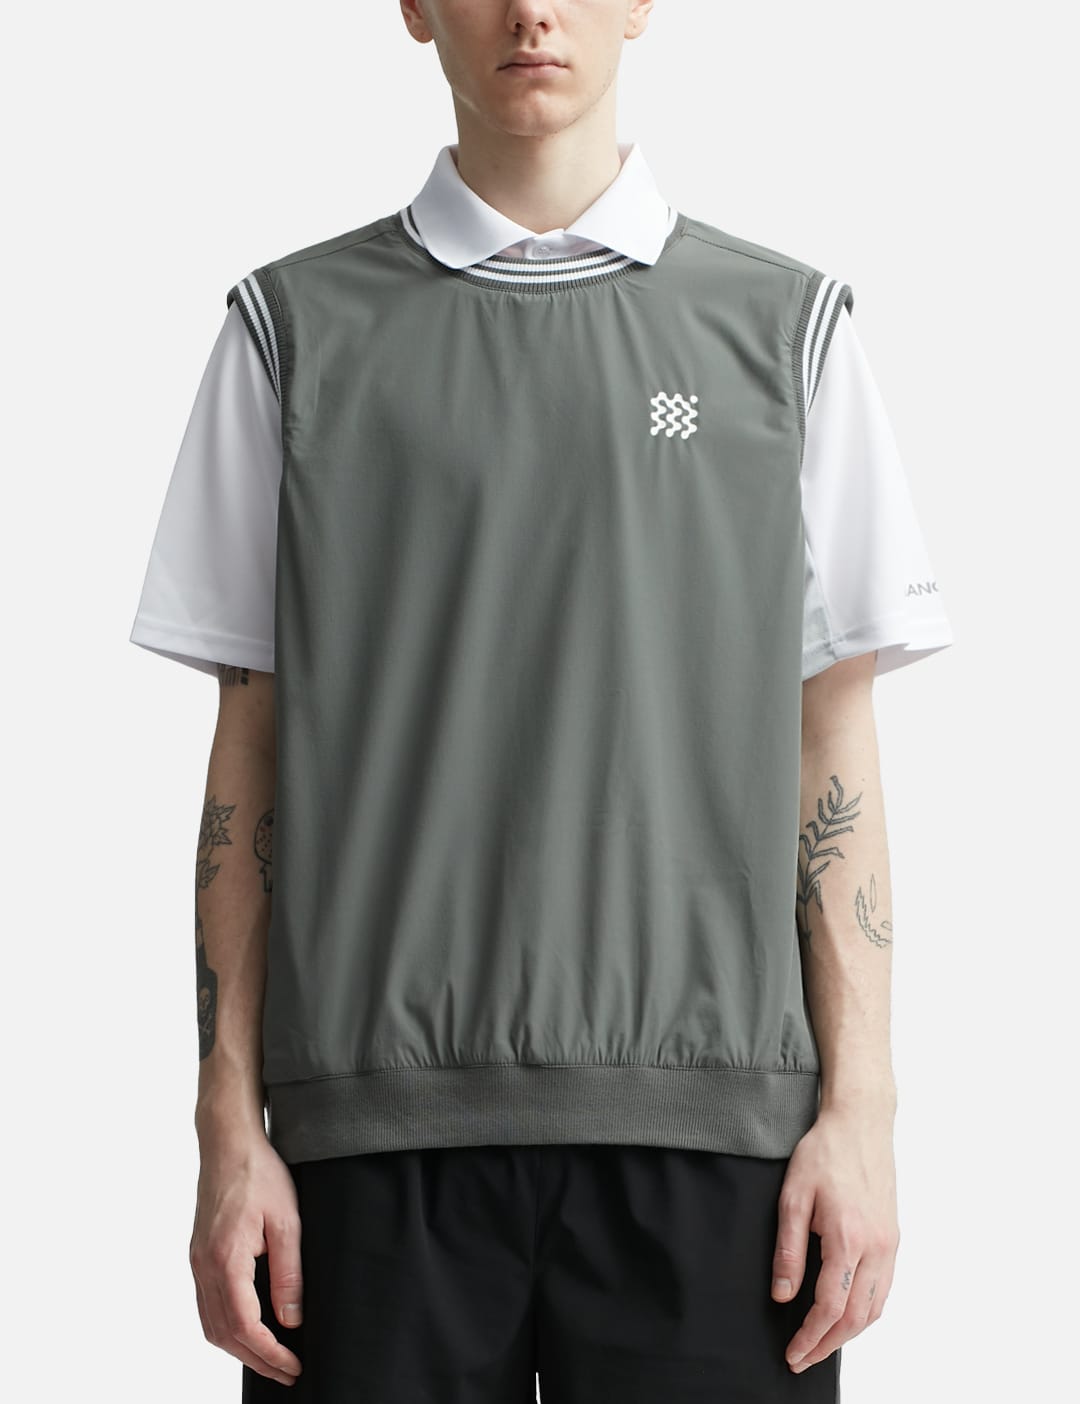 MANORS GOLF - COURSE CREWNECK VEST | HBX - Globally Curated 